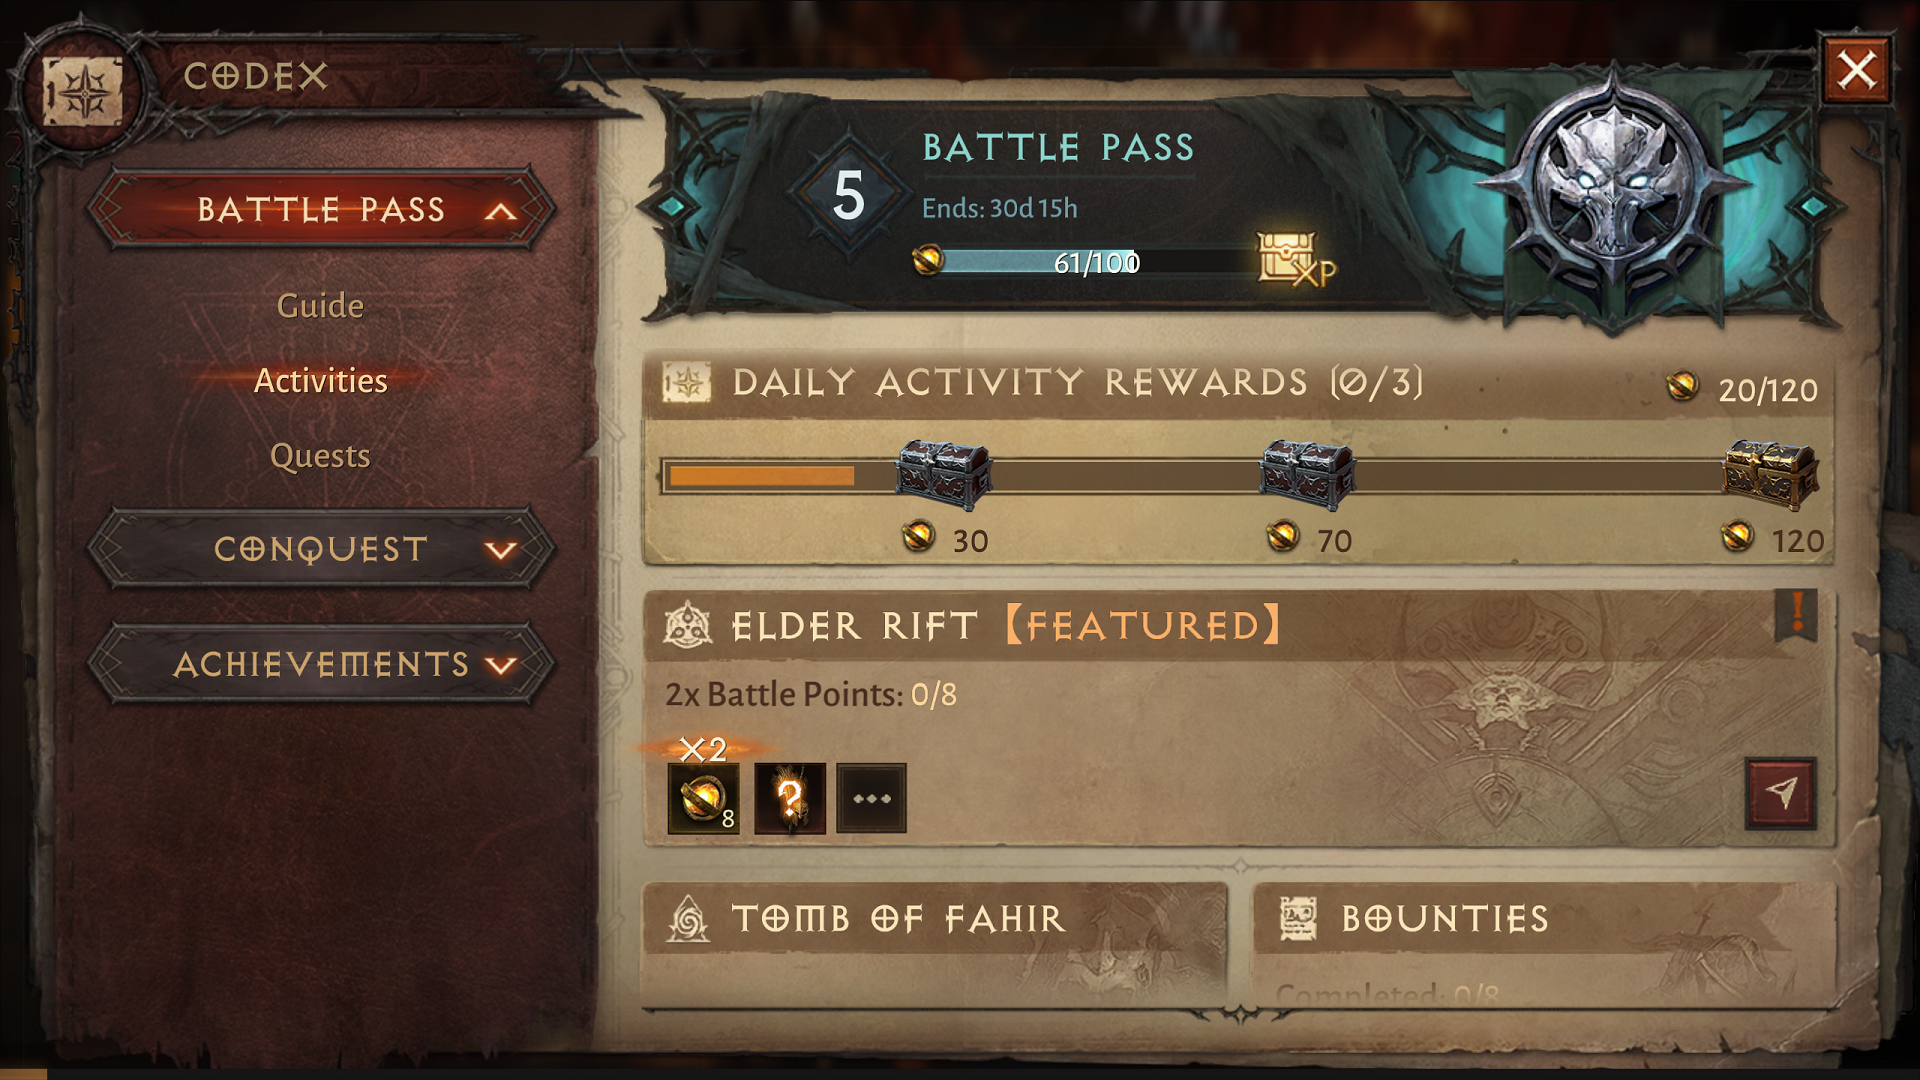 The activities and daily rewards tab for Diablo Immortal's Battle Pass